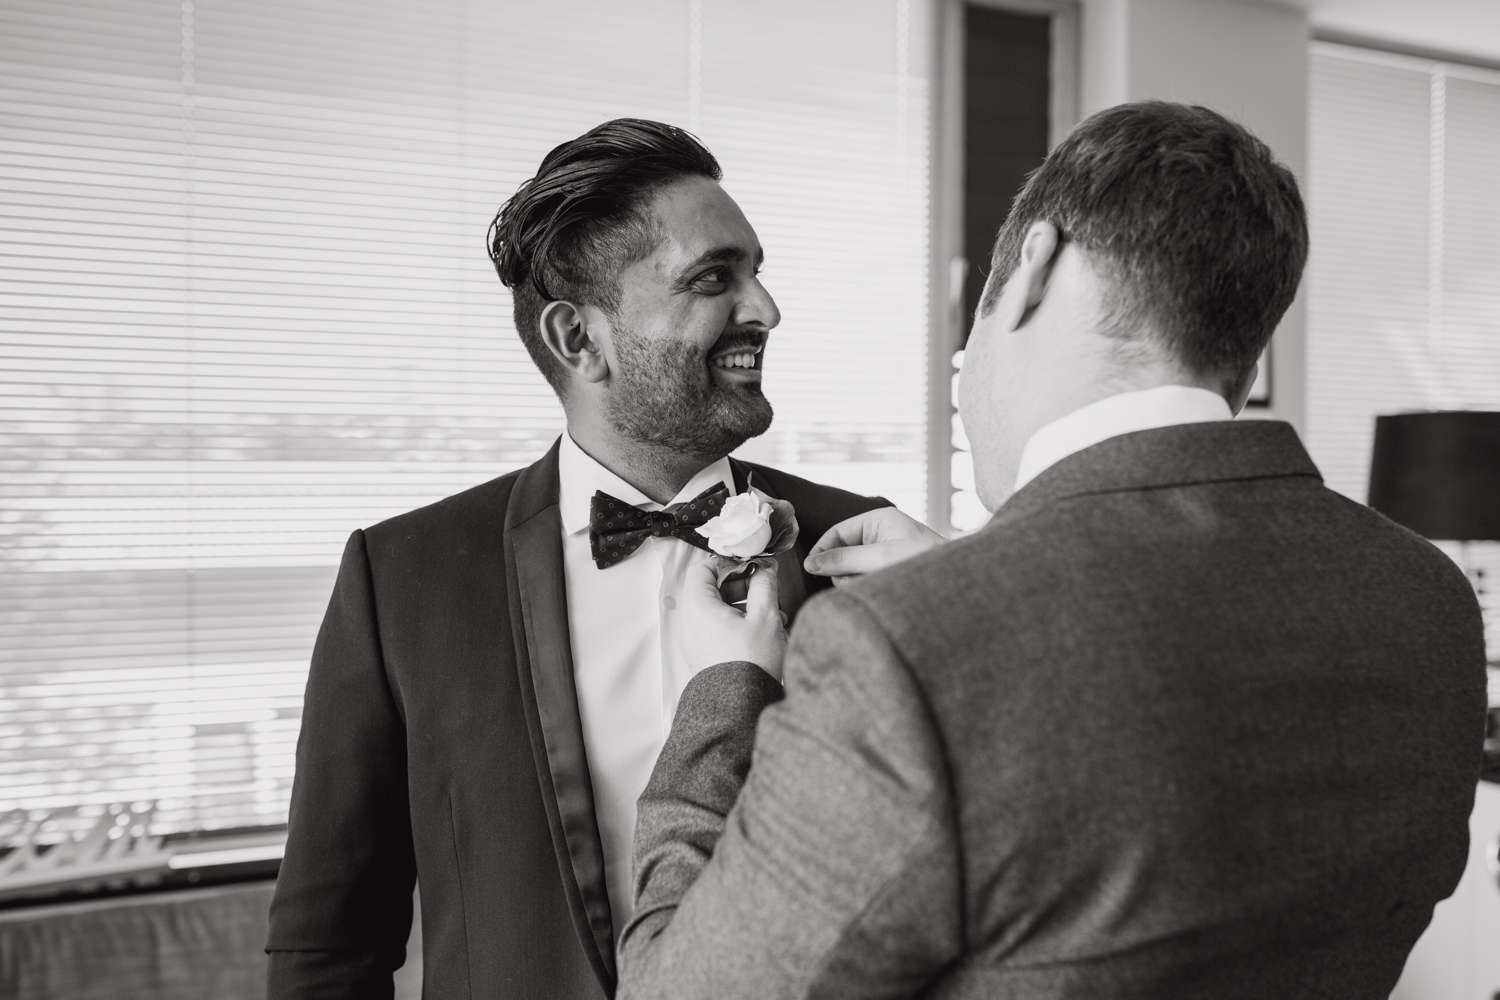 Groom getting ready for his wedding. This image was taken by Mala Photography, an Auckland based wedding photographer. The wedding was at Markovina Vineyard Estate In Kumeu, Auckland